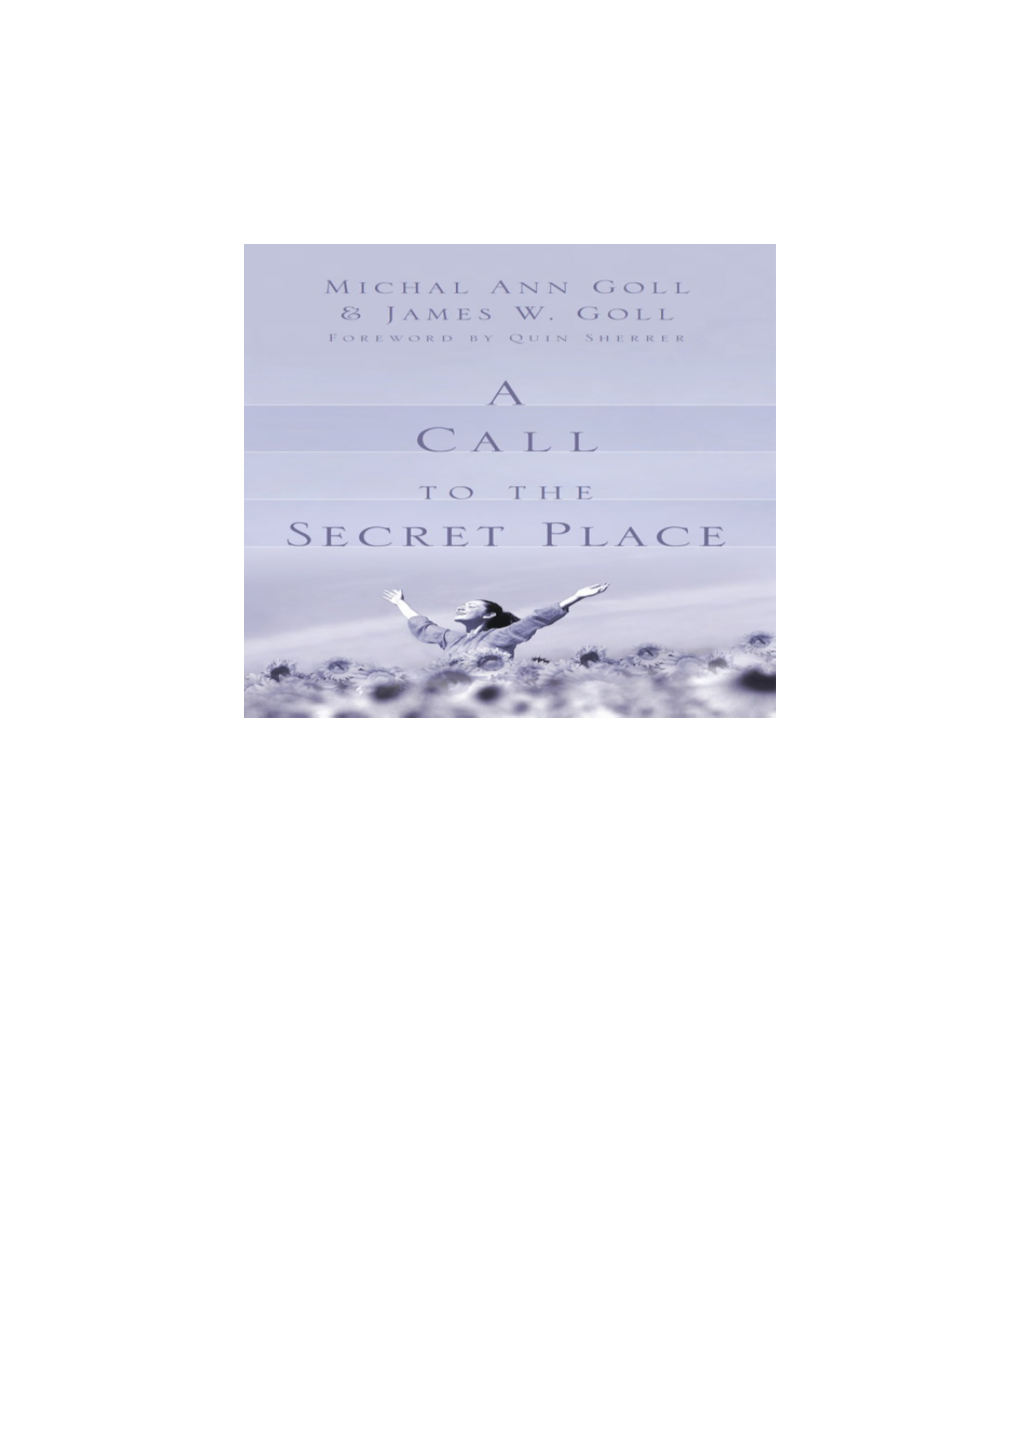 A Call to the Secret Place